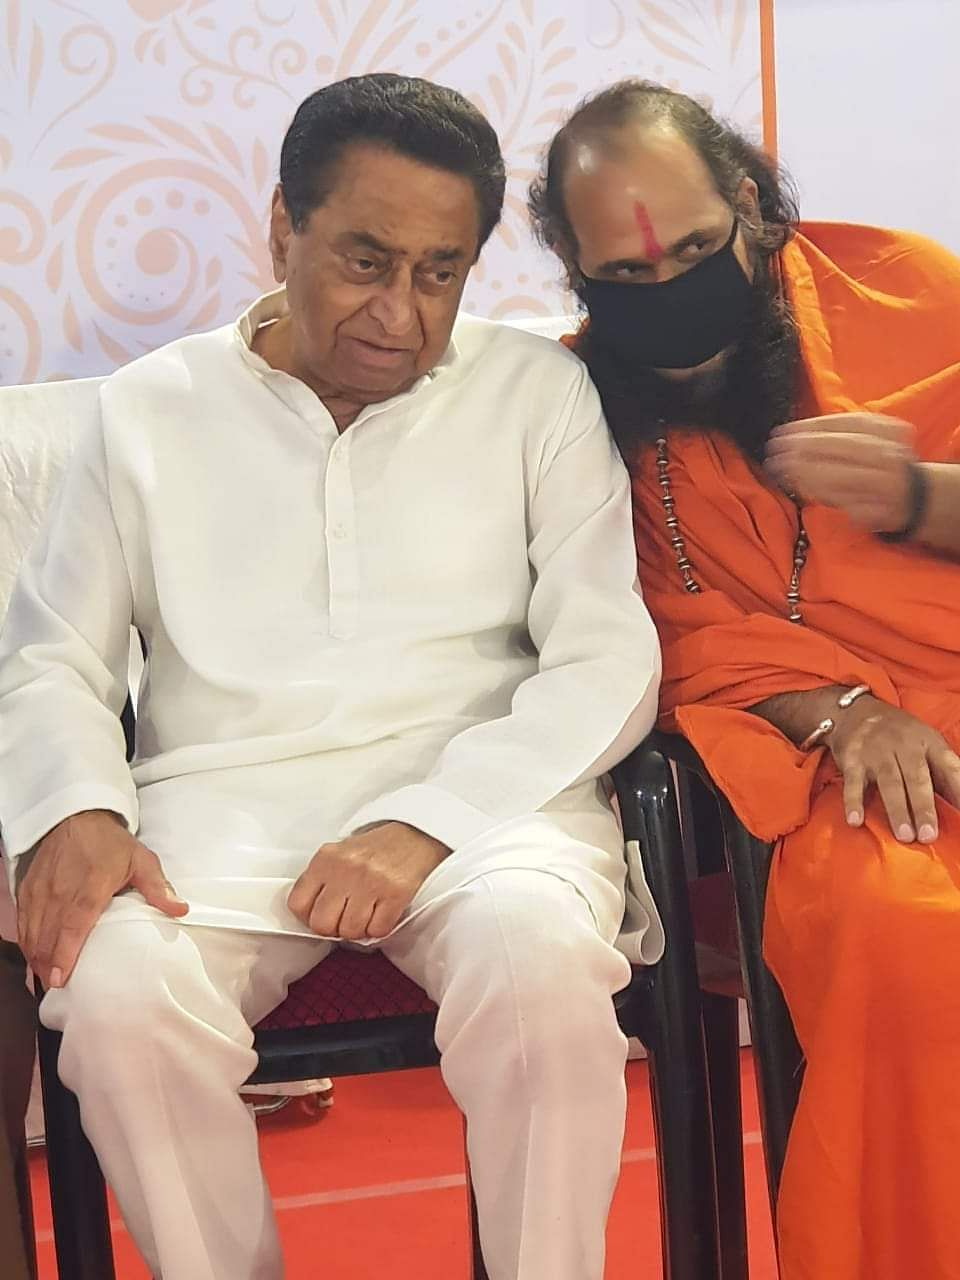 Visuals accessed by The Quint showed Mirchi Baba with former CM Kamal Nath and Home Minister Dr Narottam Mishra.